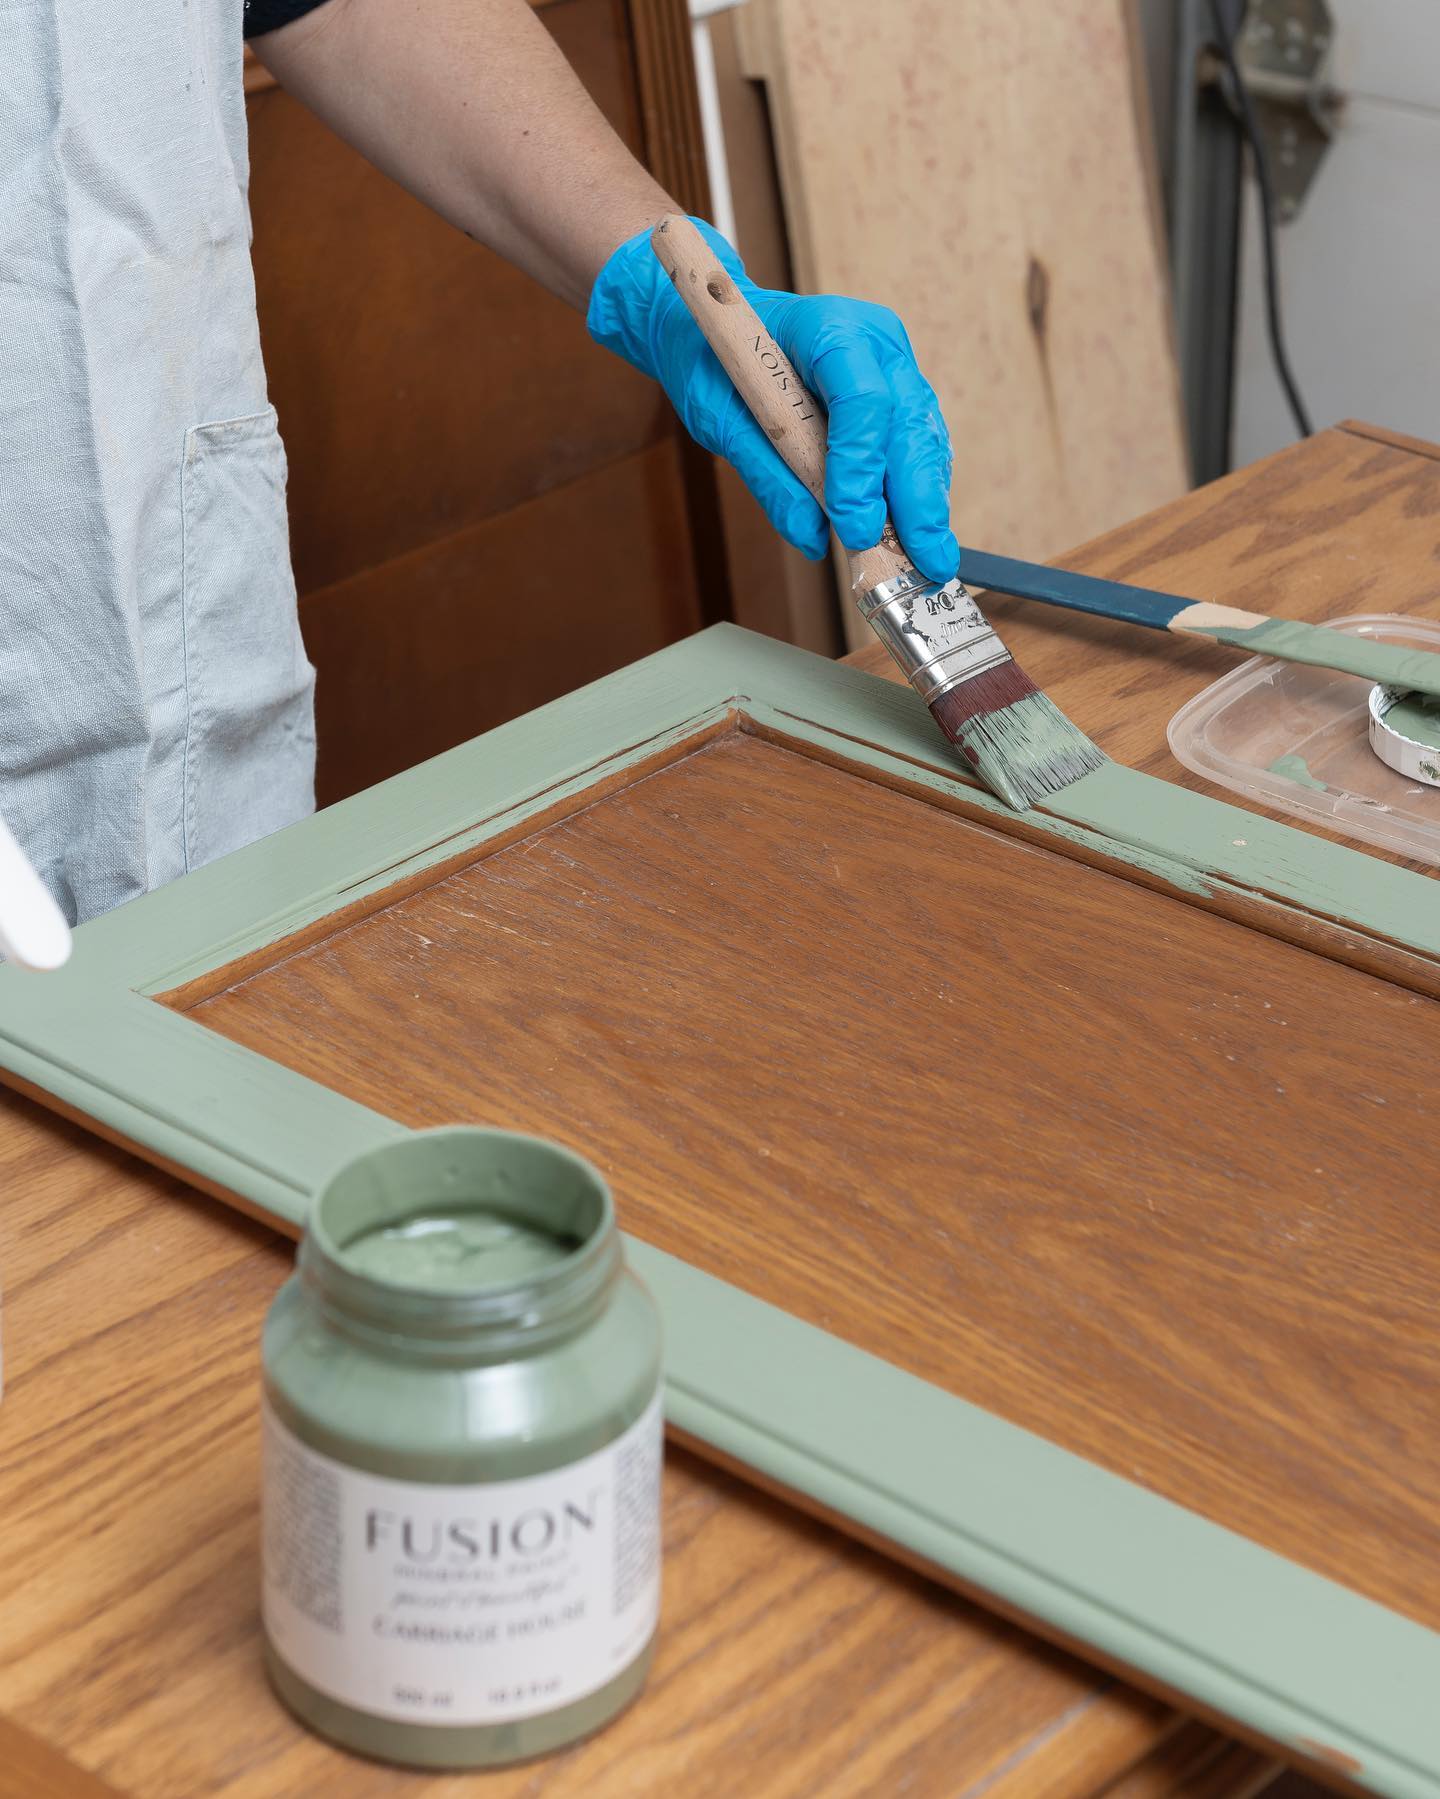 Carriage House - Fusion Mineral Paint - I Restore Stuff